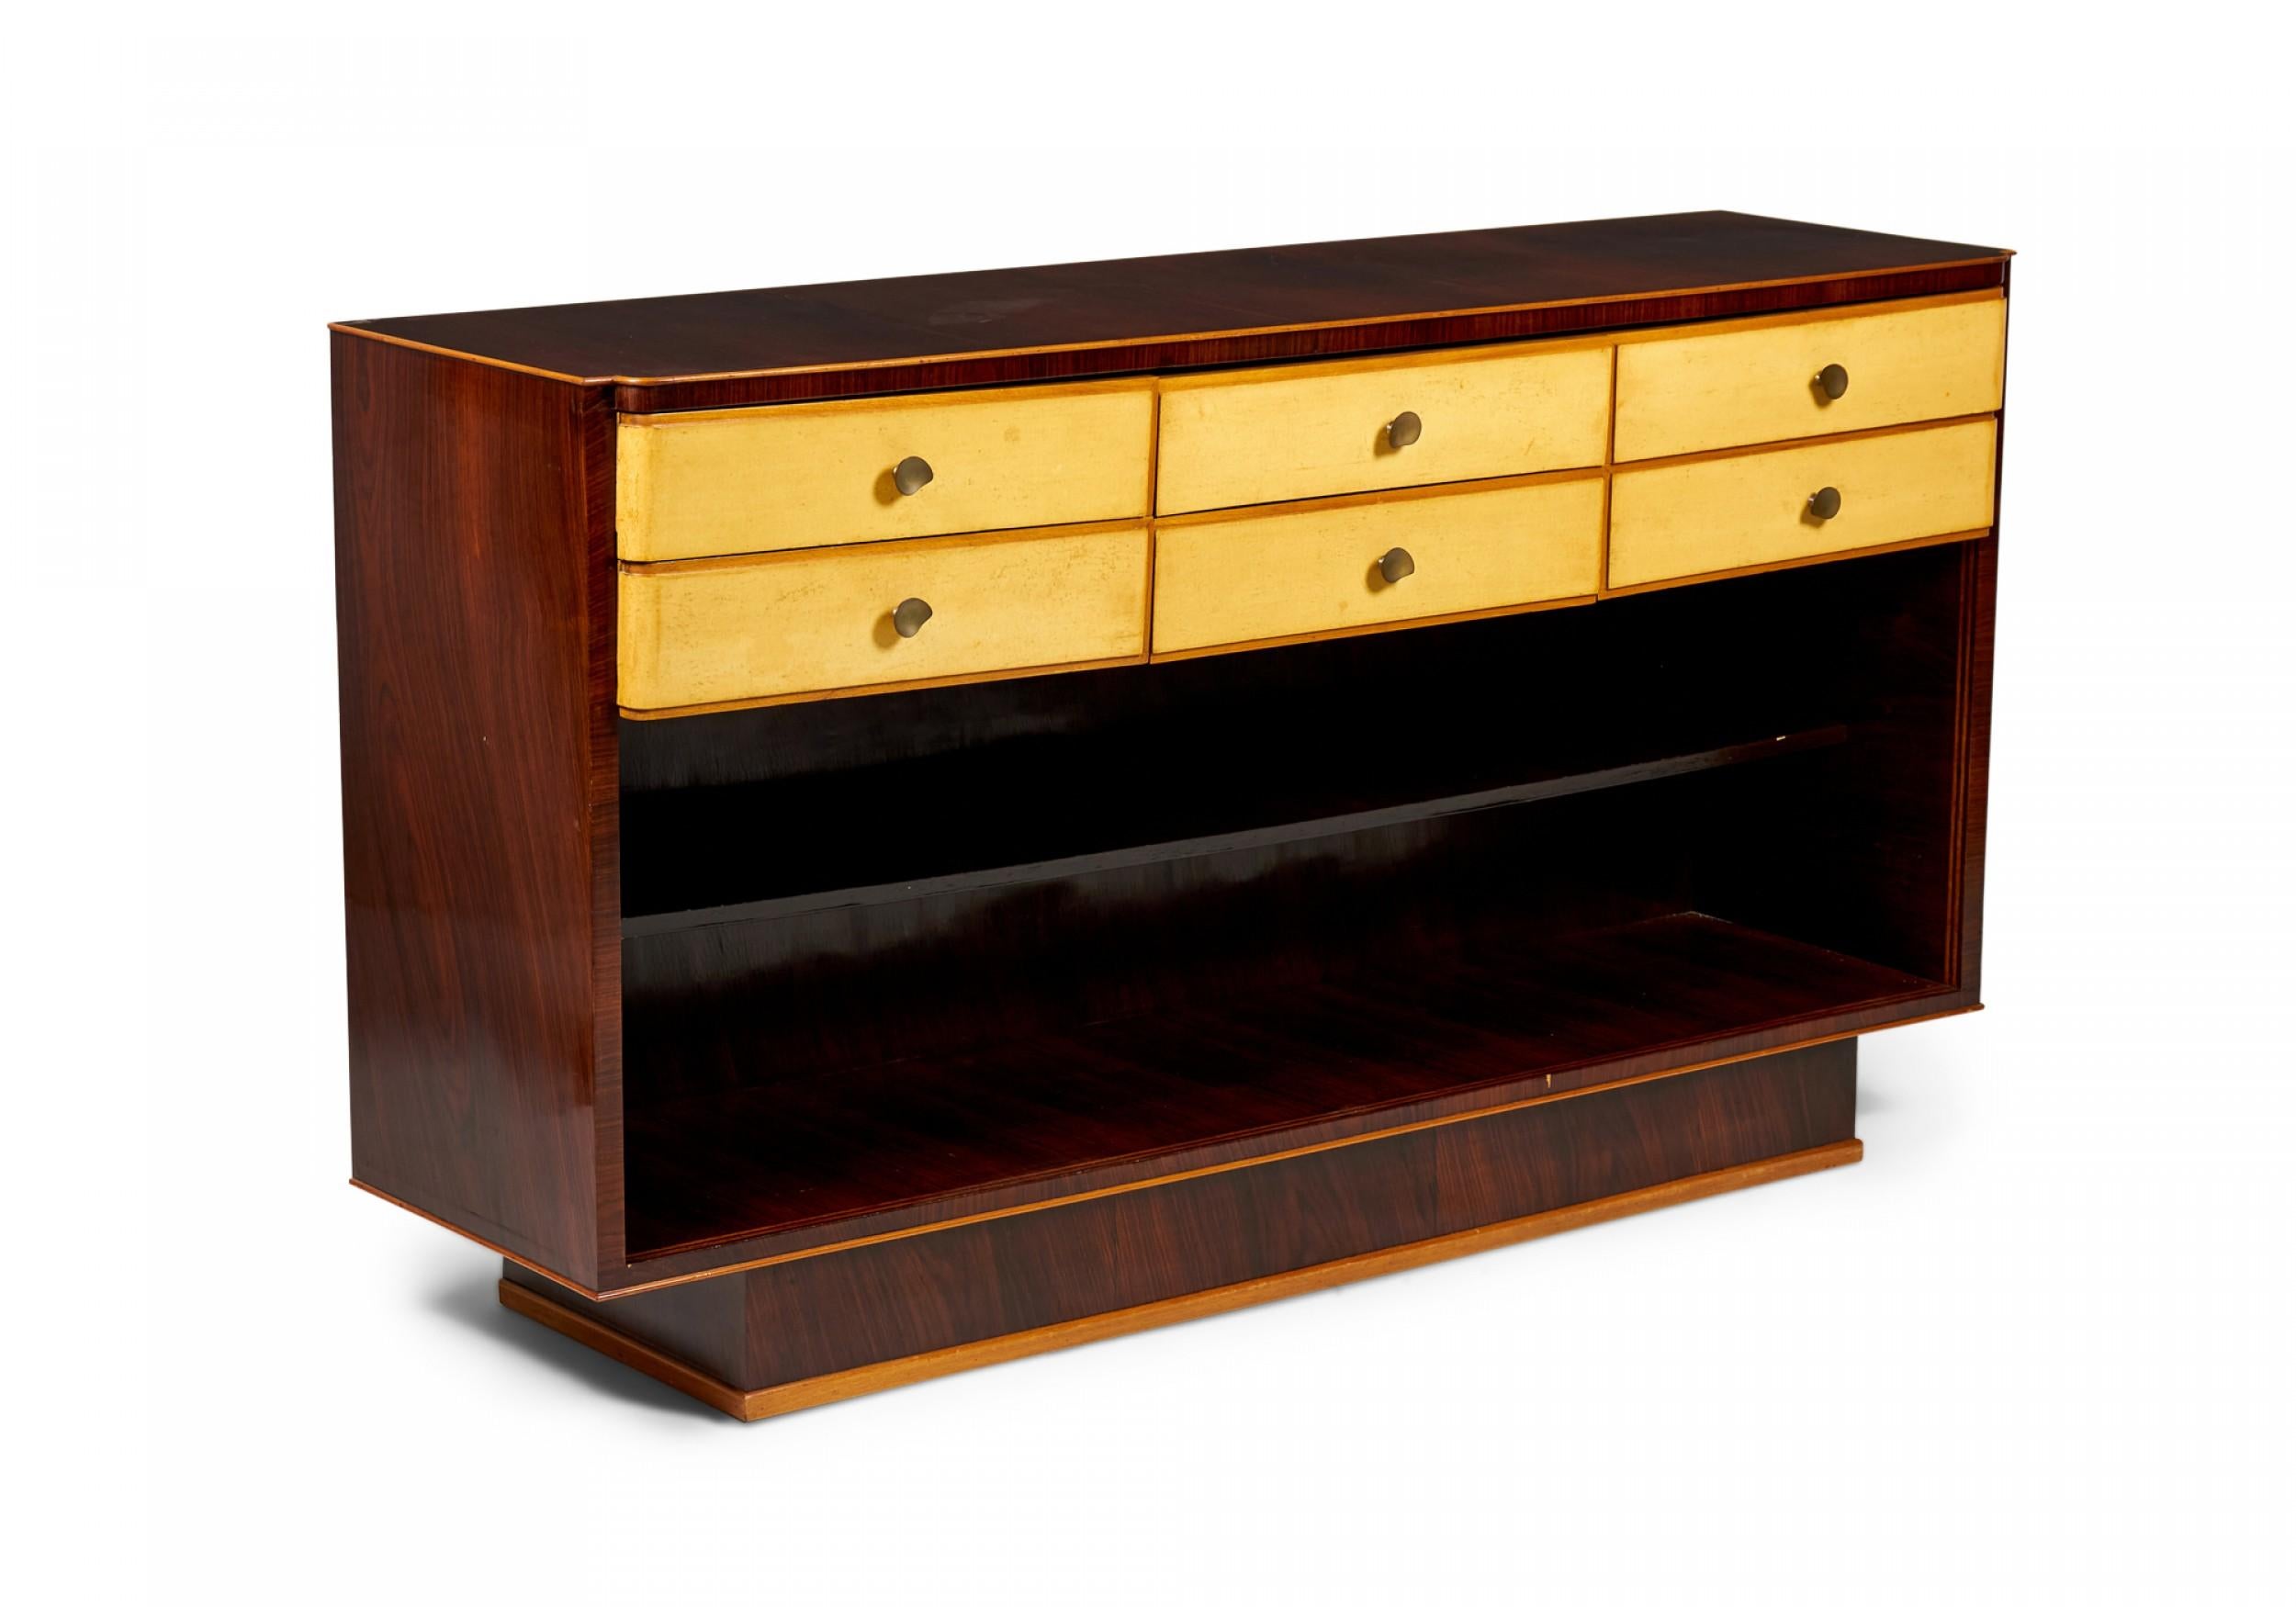 20th Century Italian Art Deco Rosewood and Parchment Veneer Credenza 'Manner of Borsani' For Sale